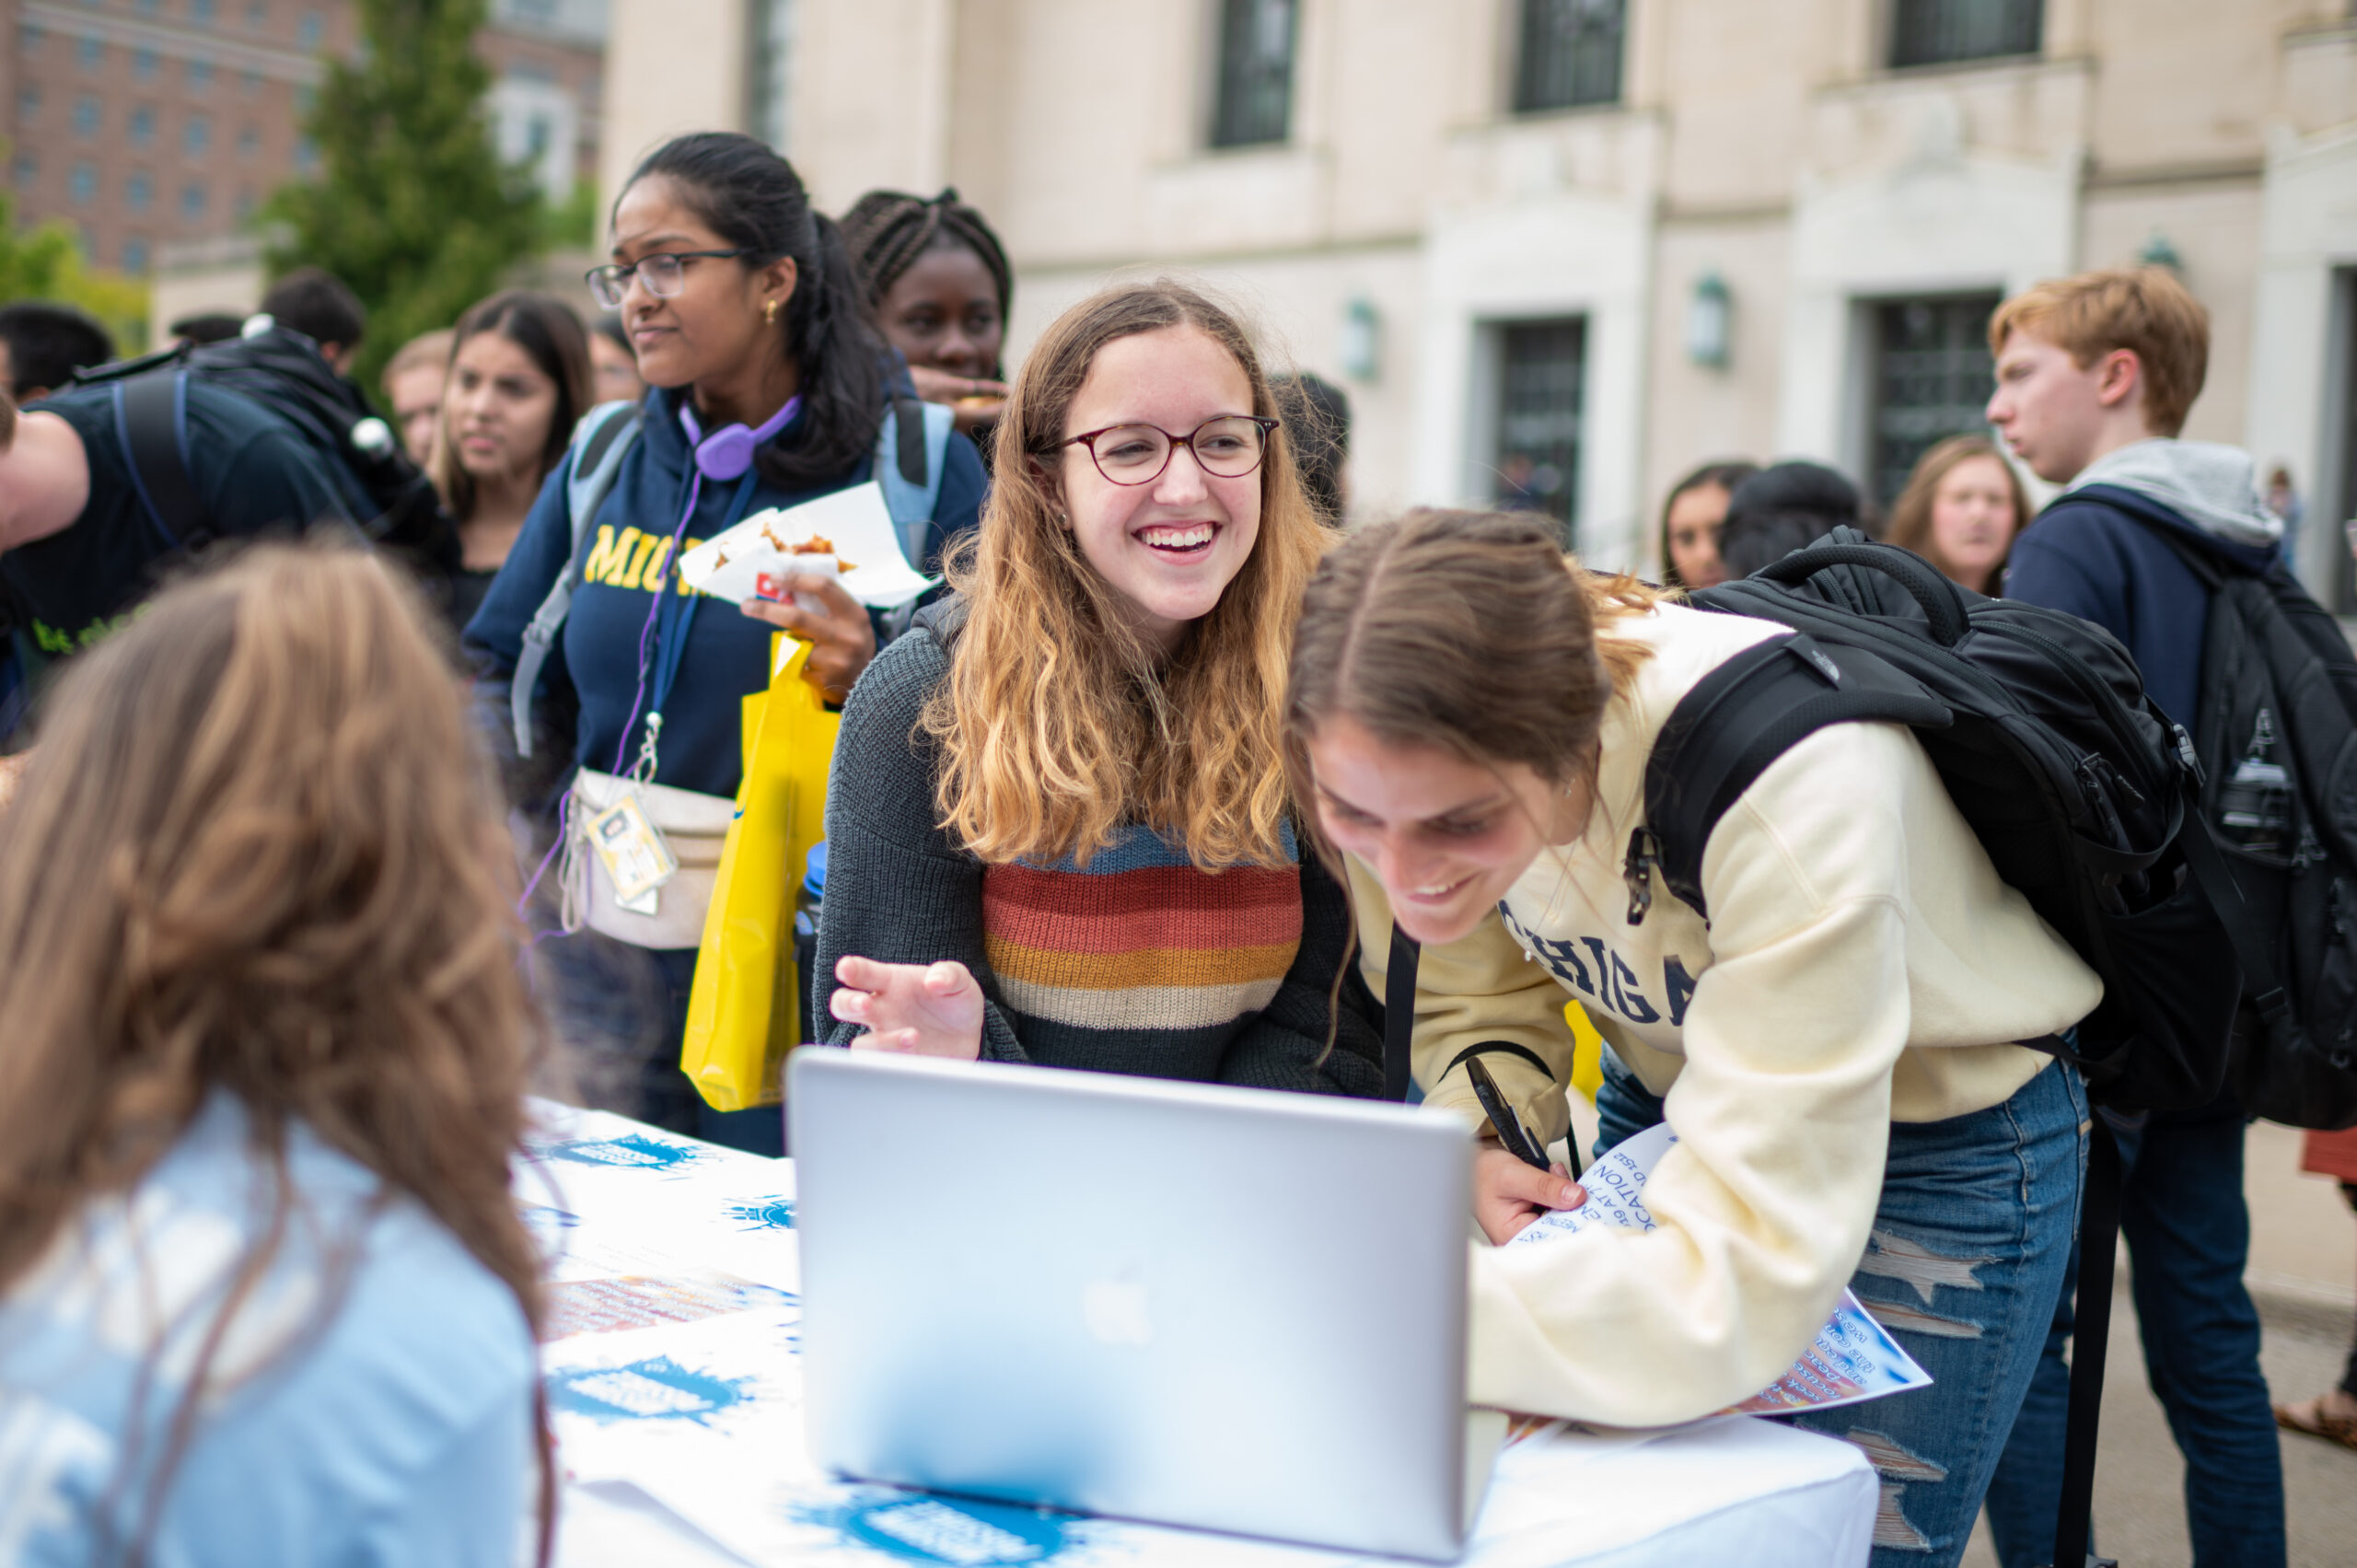 Students gather around table during campus event